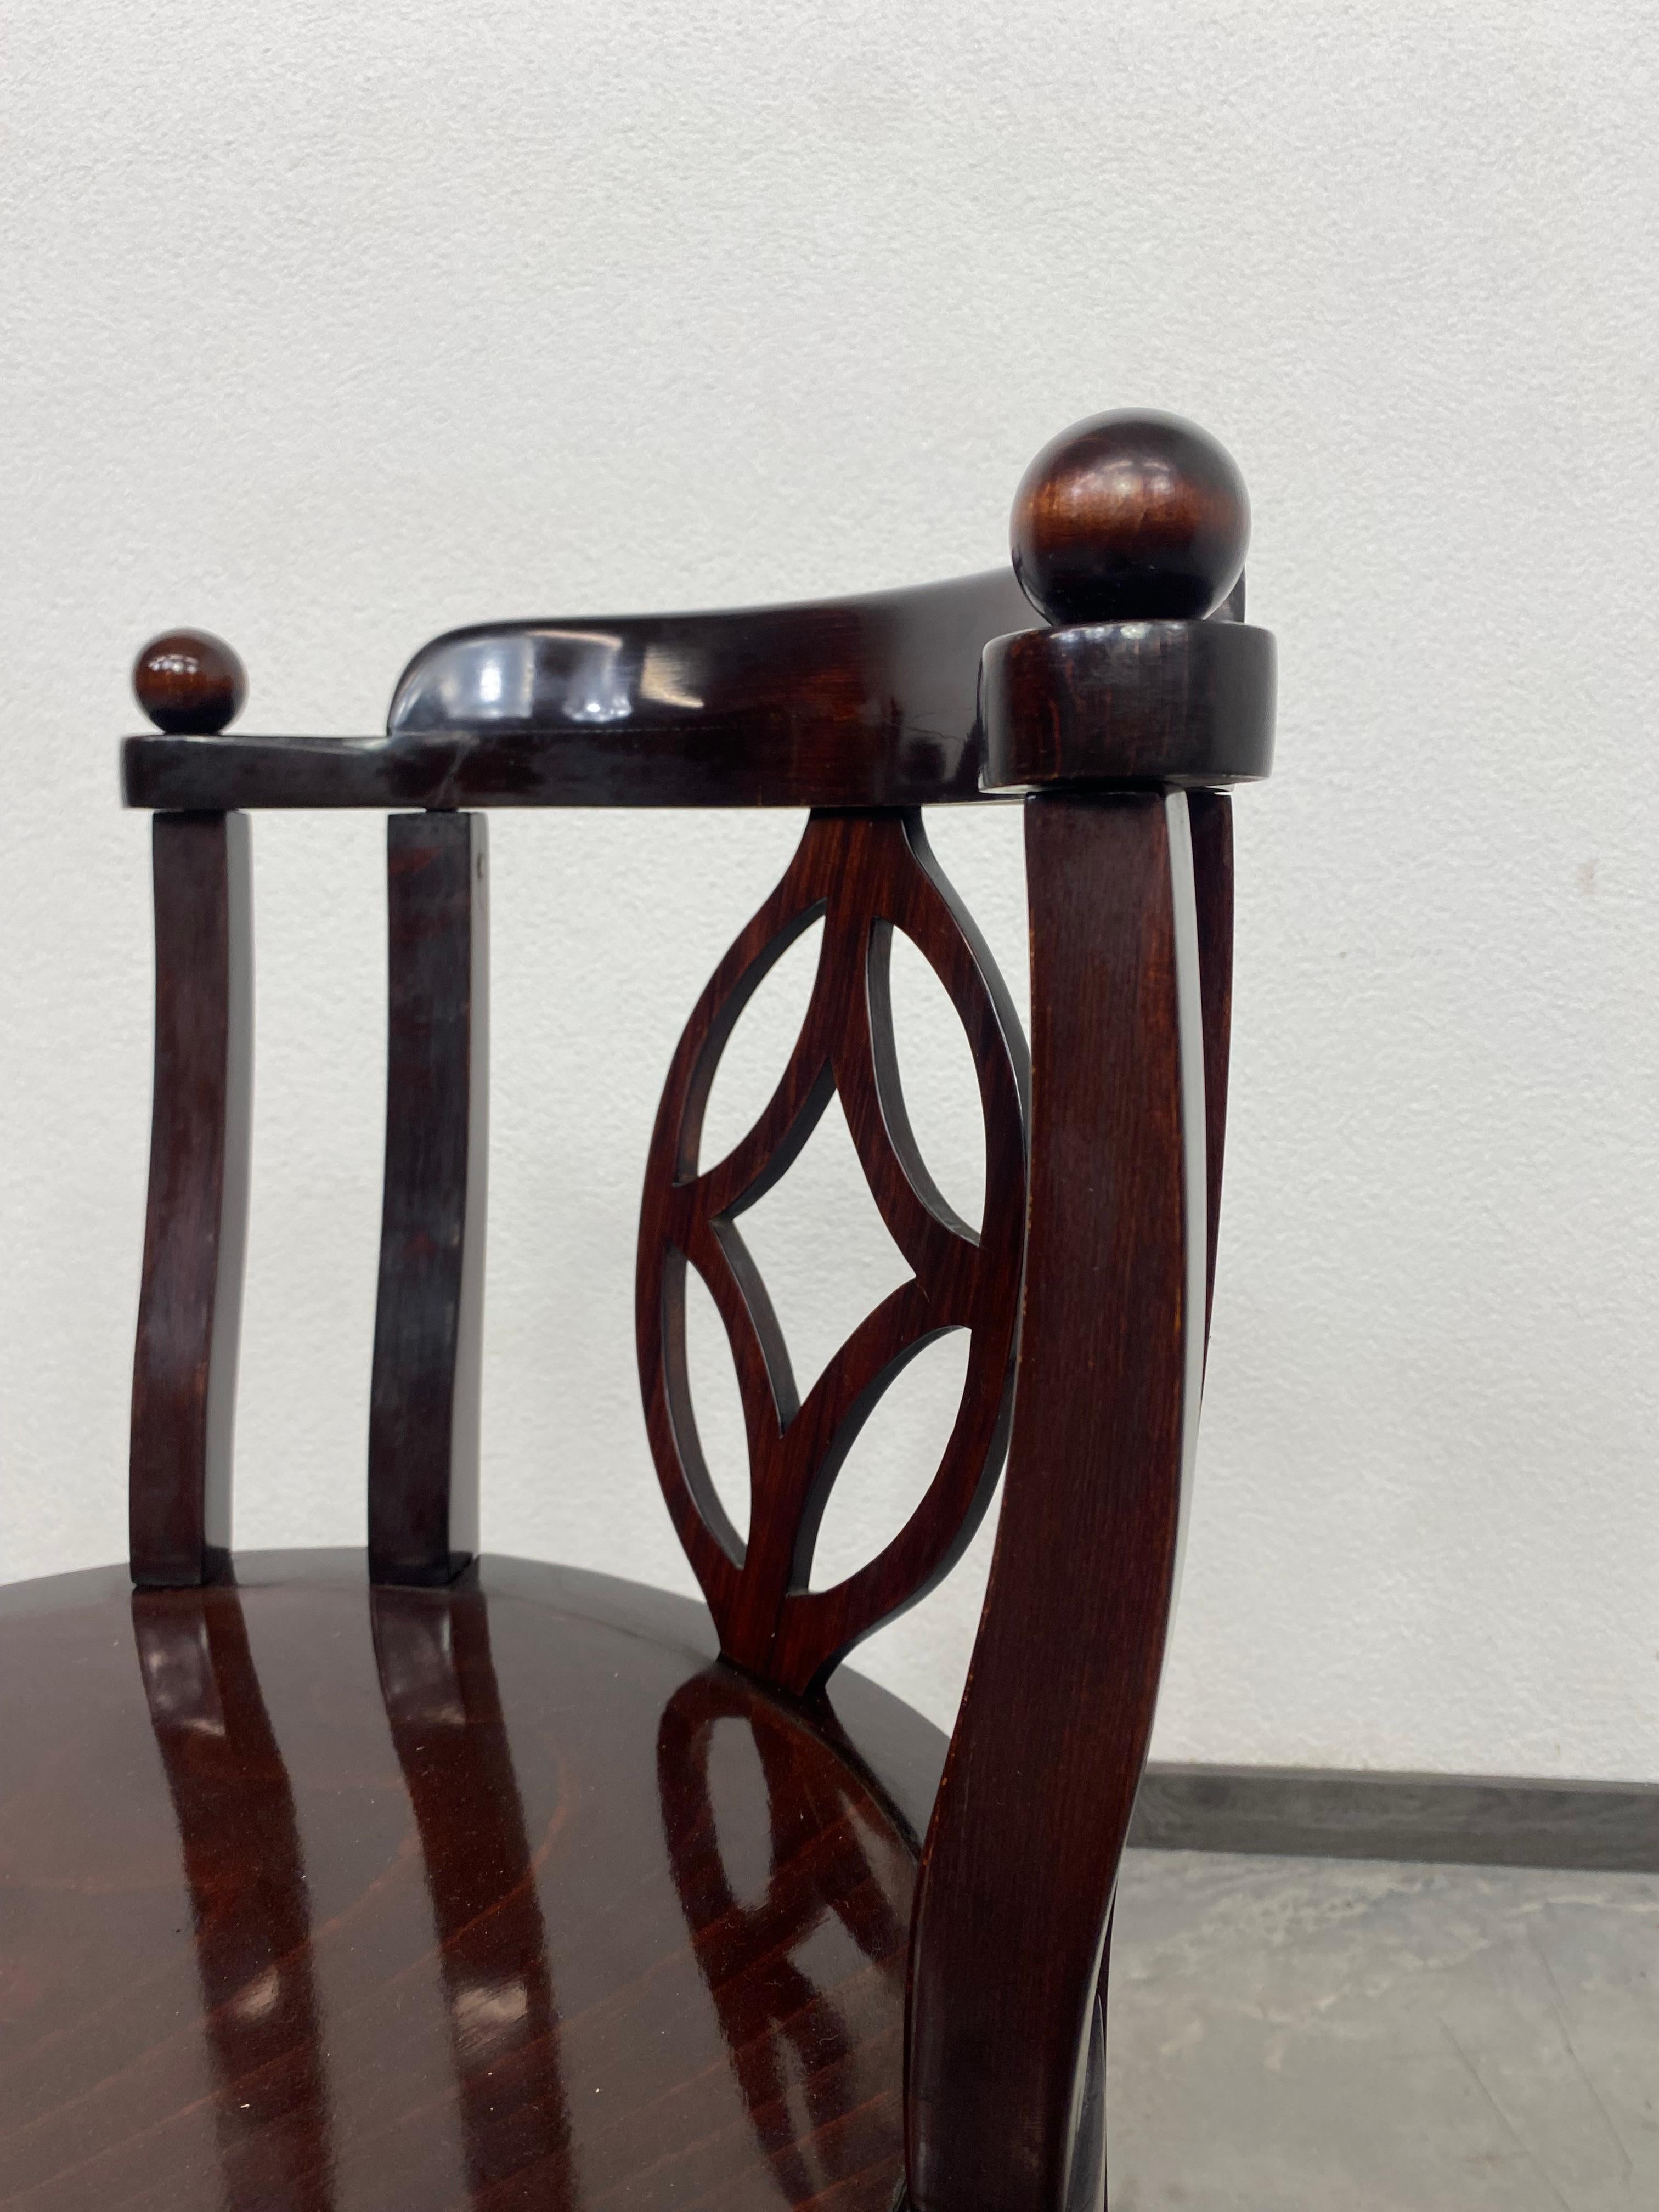 Beech Secession chair atr. Kolo Moser For Sale